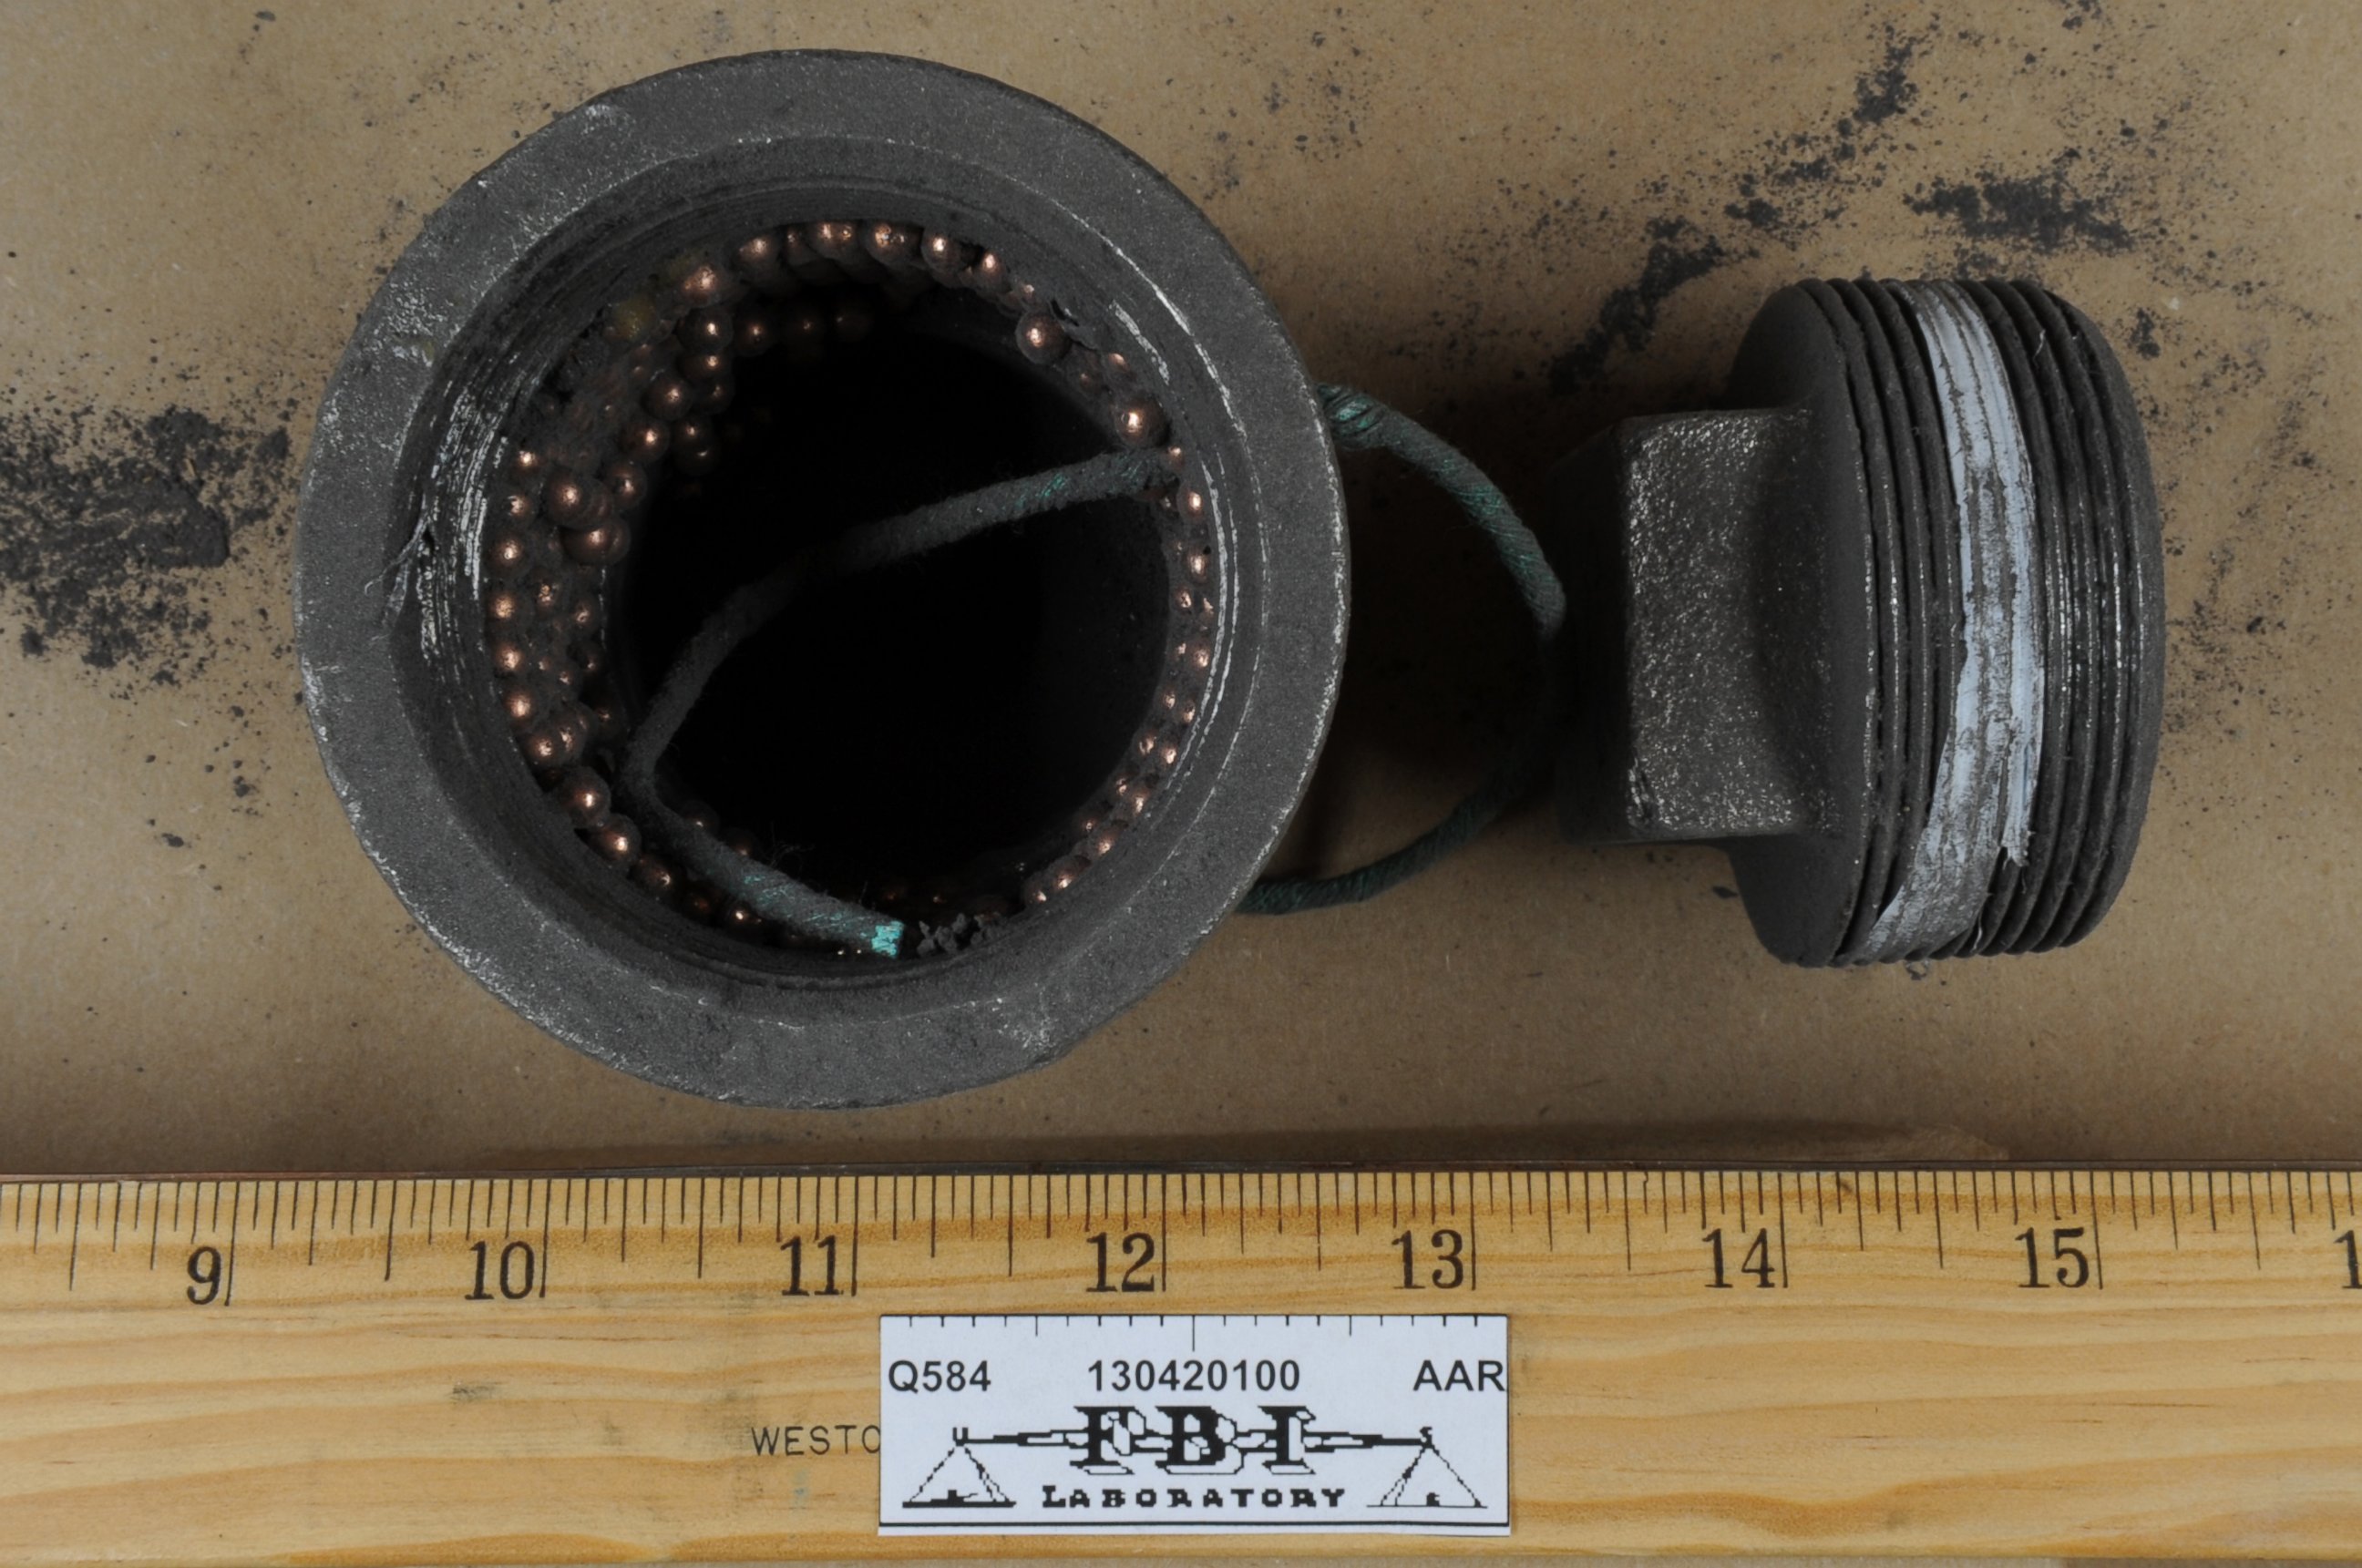 PHOTO: This evidence photo provided by U.S. Attorney's Office/Massachusetts shows unexploded pipe bombs from the Dzhokhar Tsarnaev case.